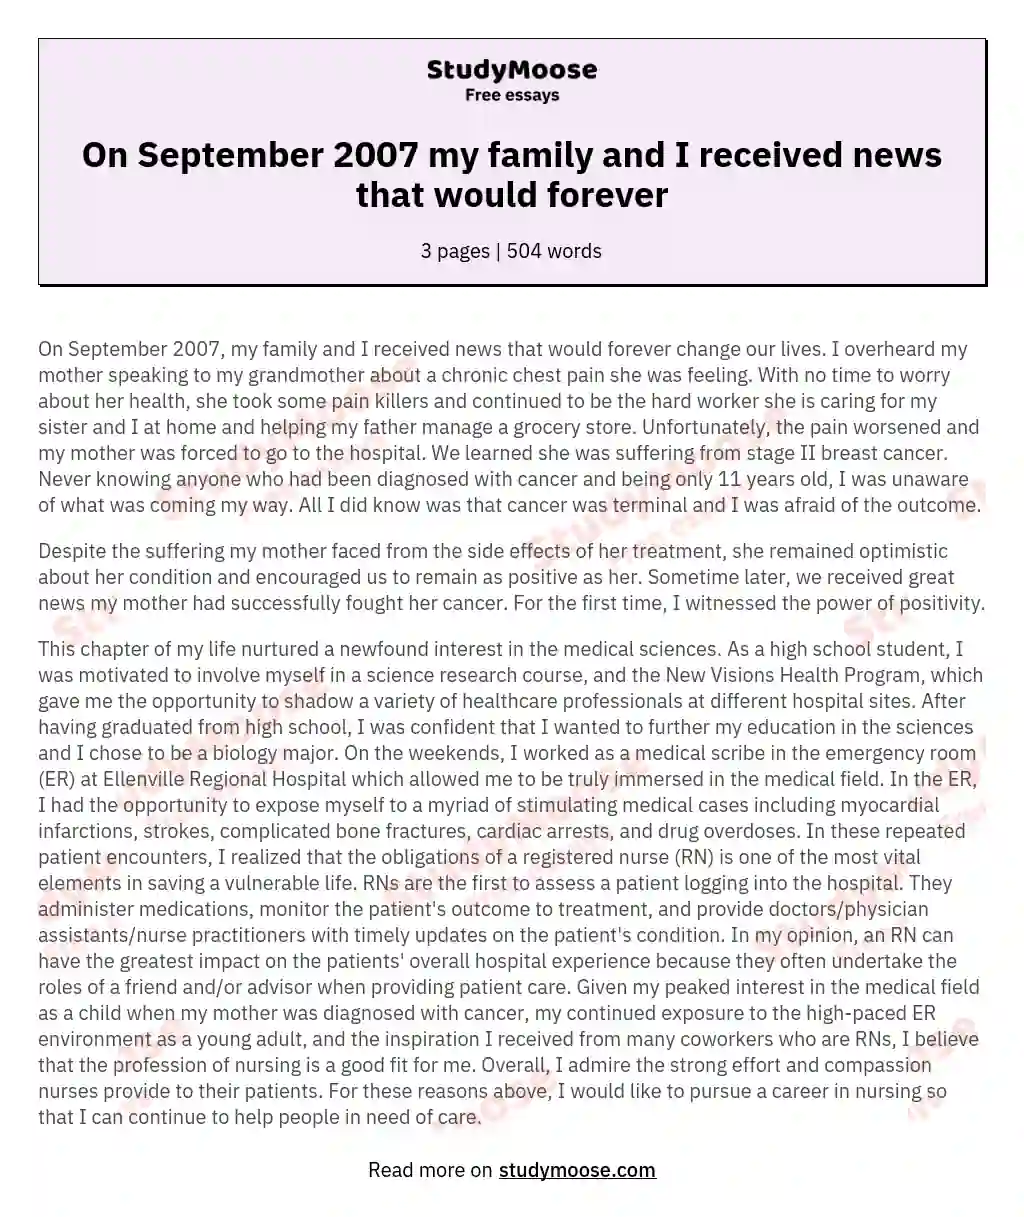 On September 2007 my family and I received news that would forever